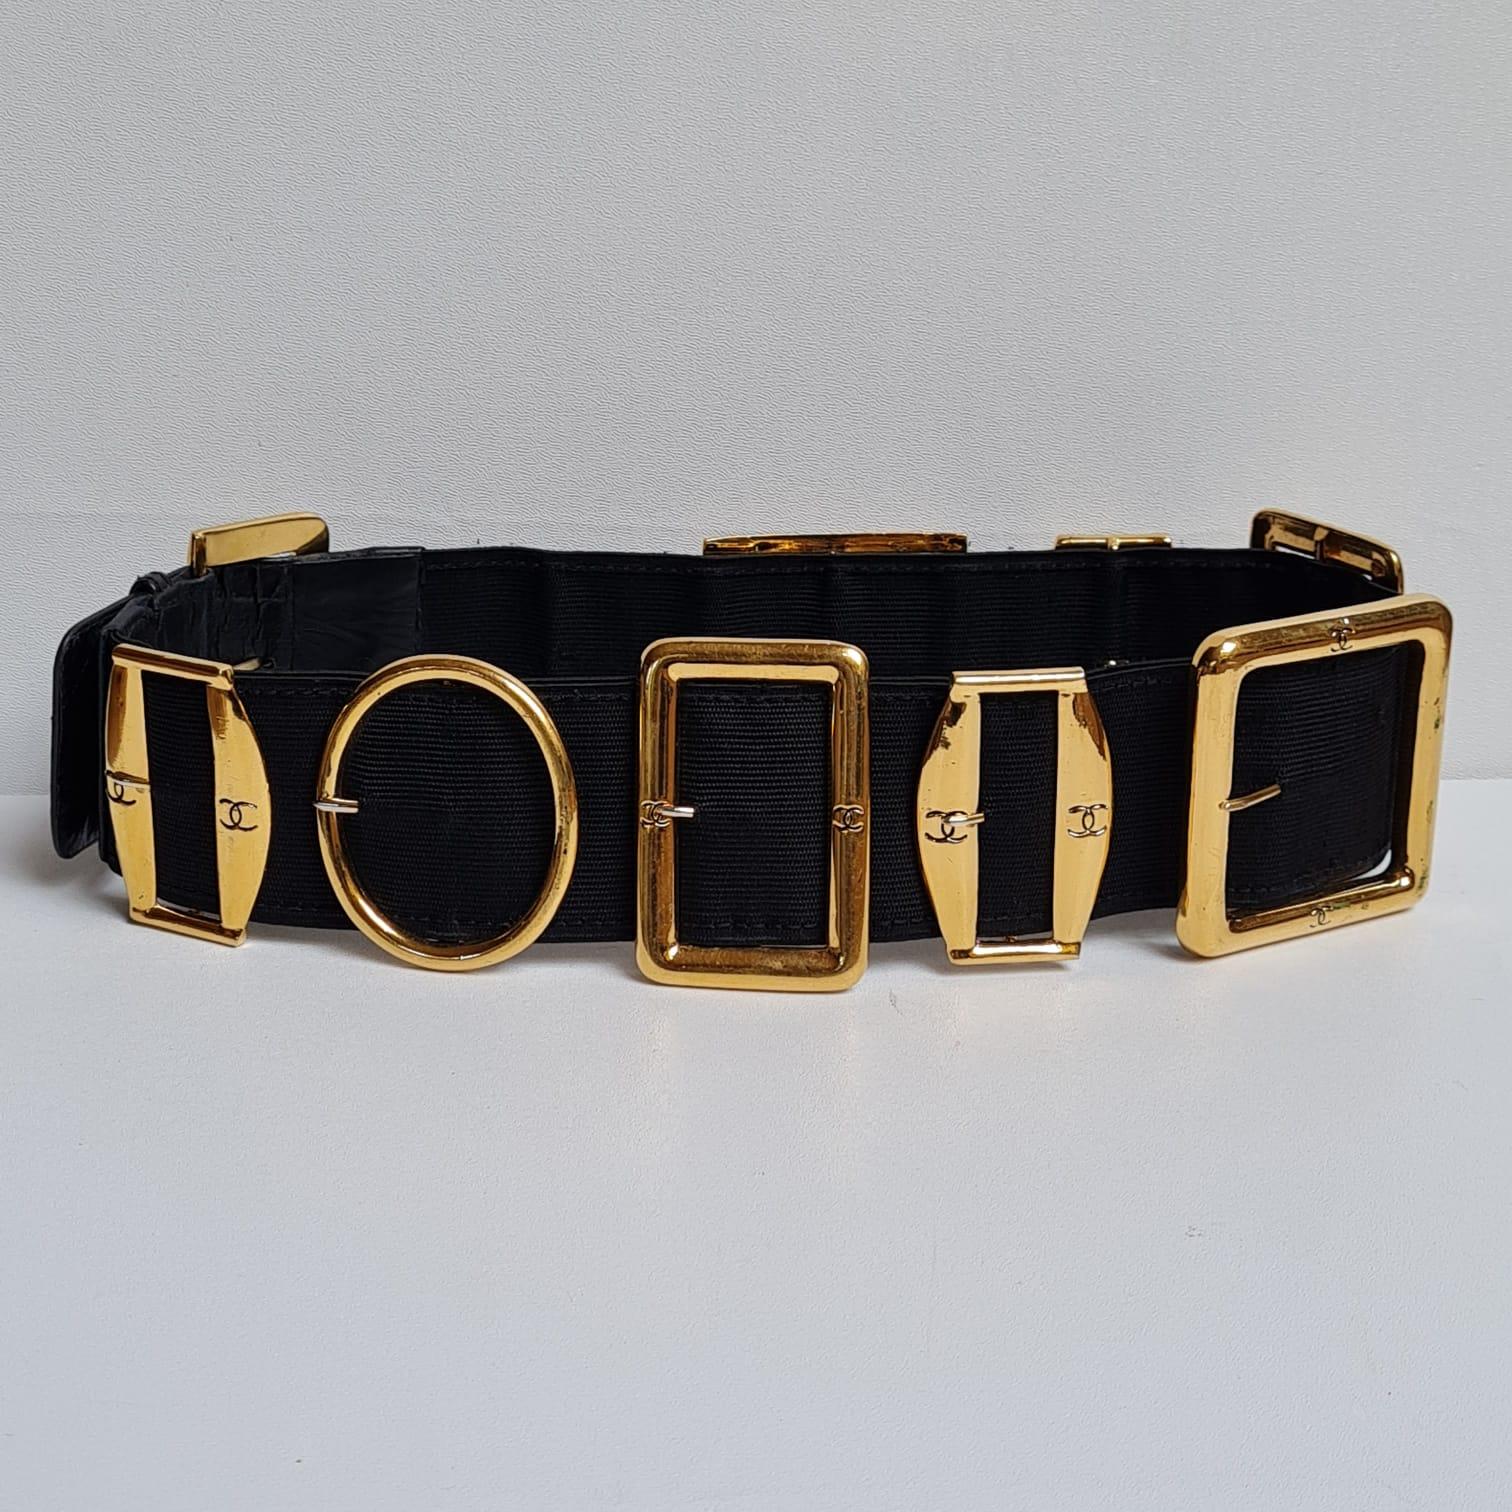 Rare all around buckled chanel elastic belt. Size 95. Item is in fair condition, missing one of its significant buckle piece as seen on the pictures with slightly noticeable hole on it. Slight peeling on the corner leather bit. But overall still